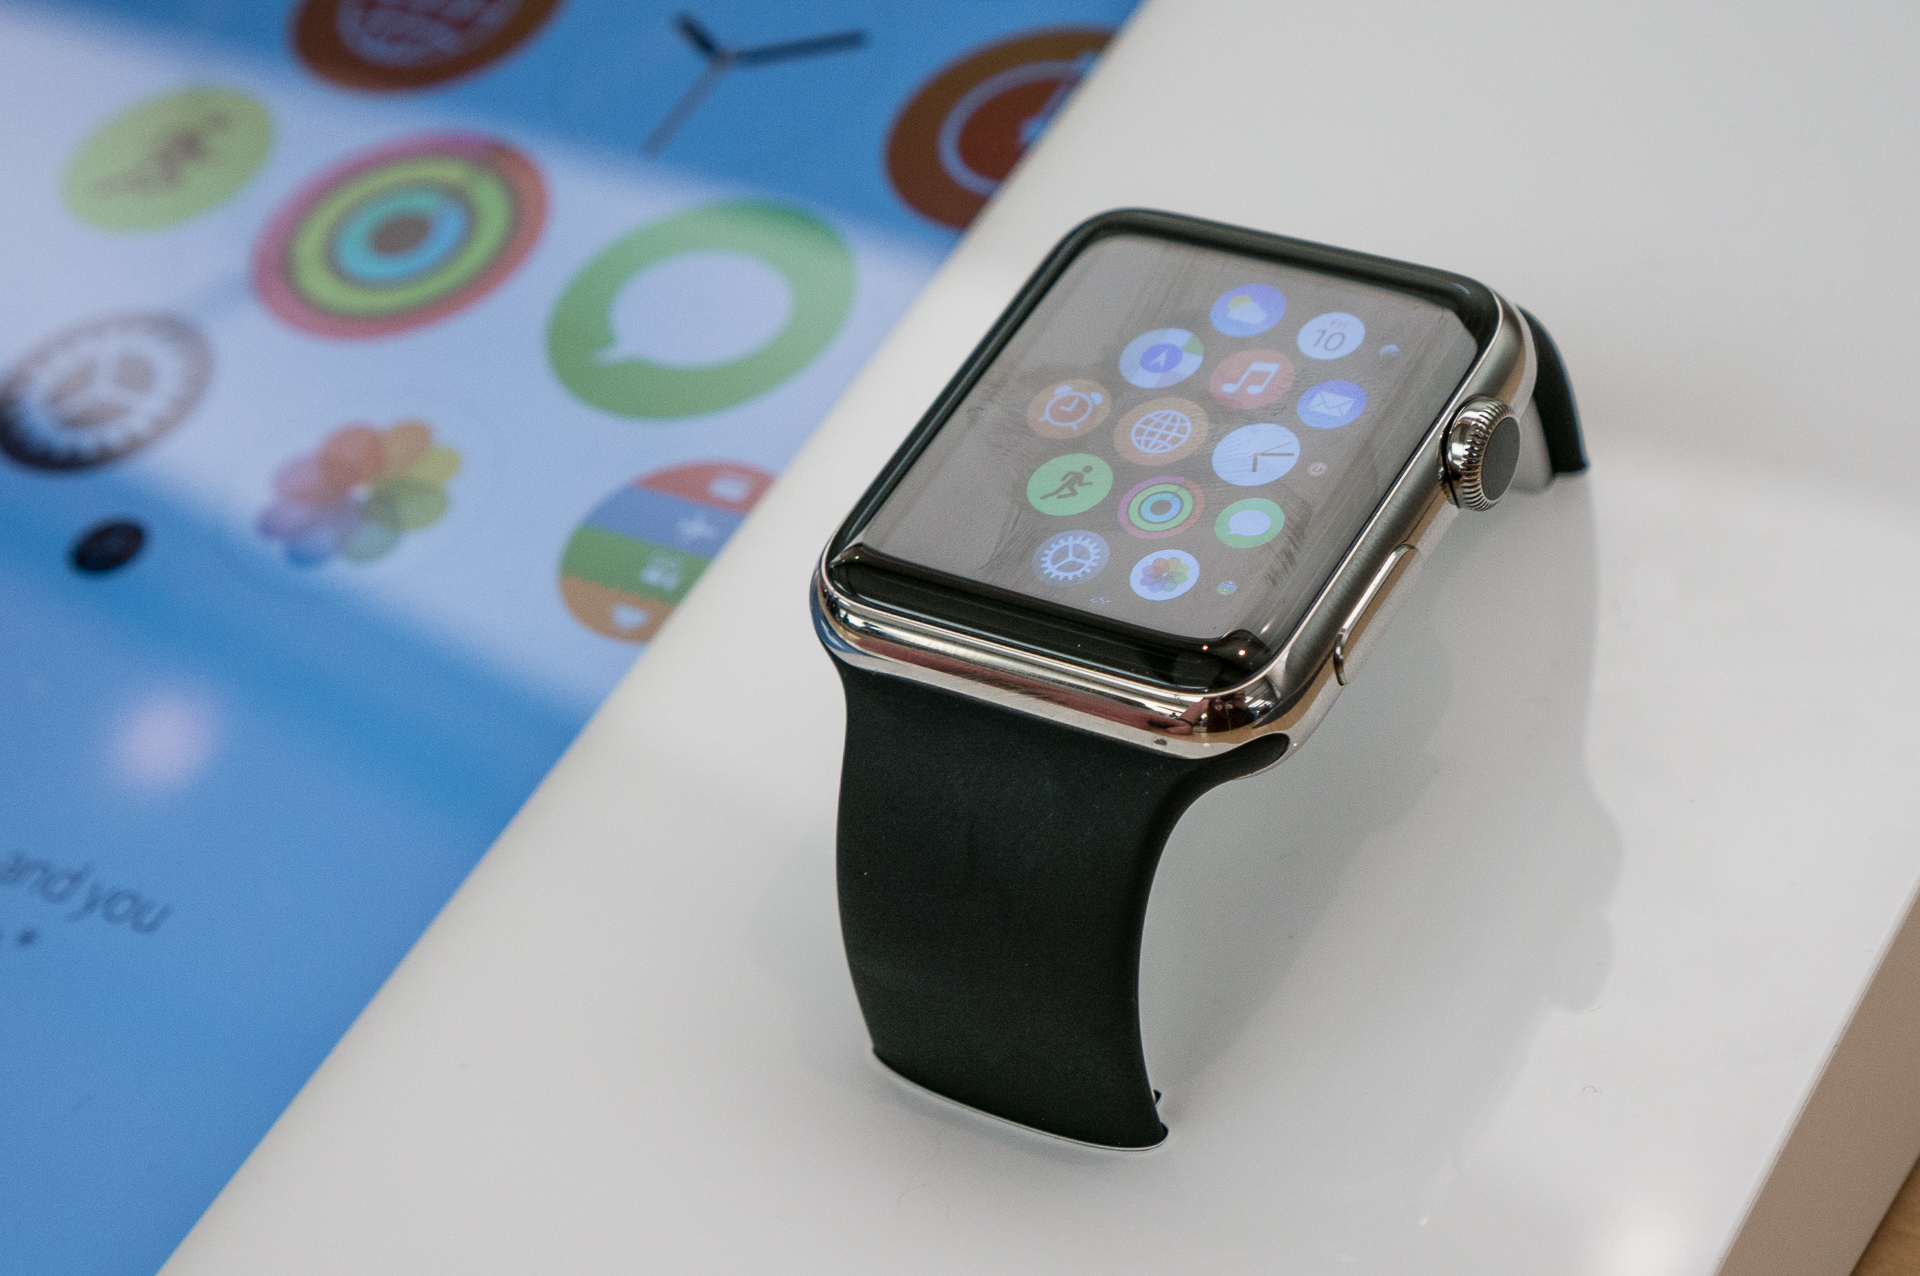 How the new apple watch is working for someone who is both deaf and registered blind